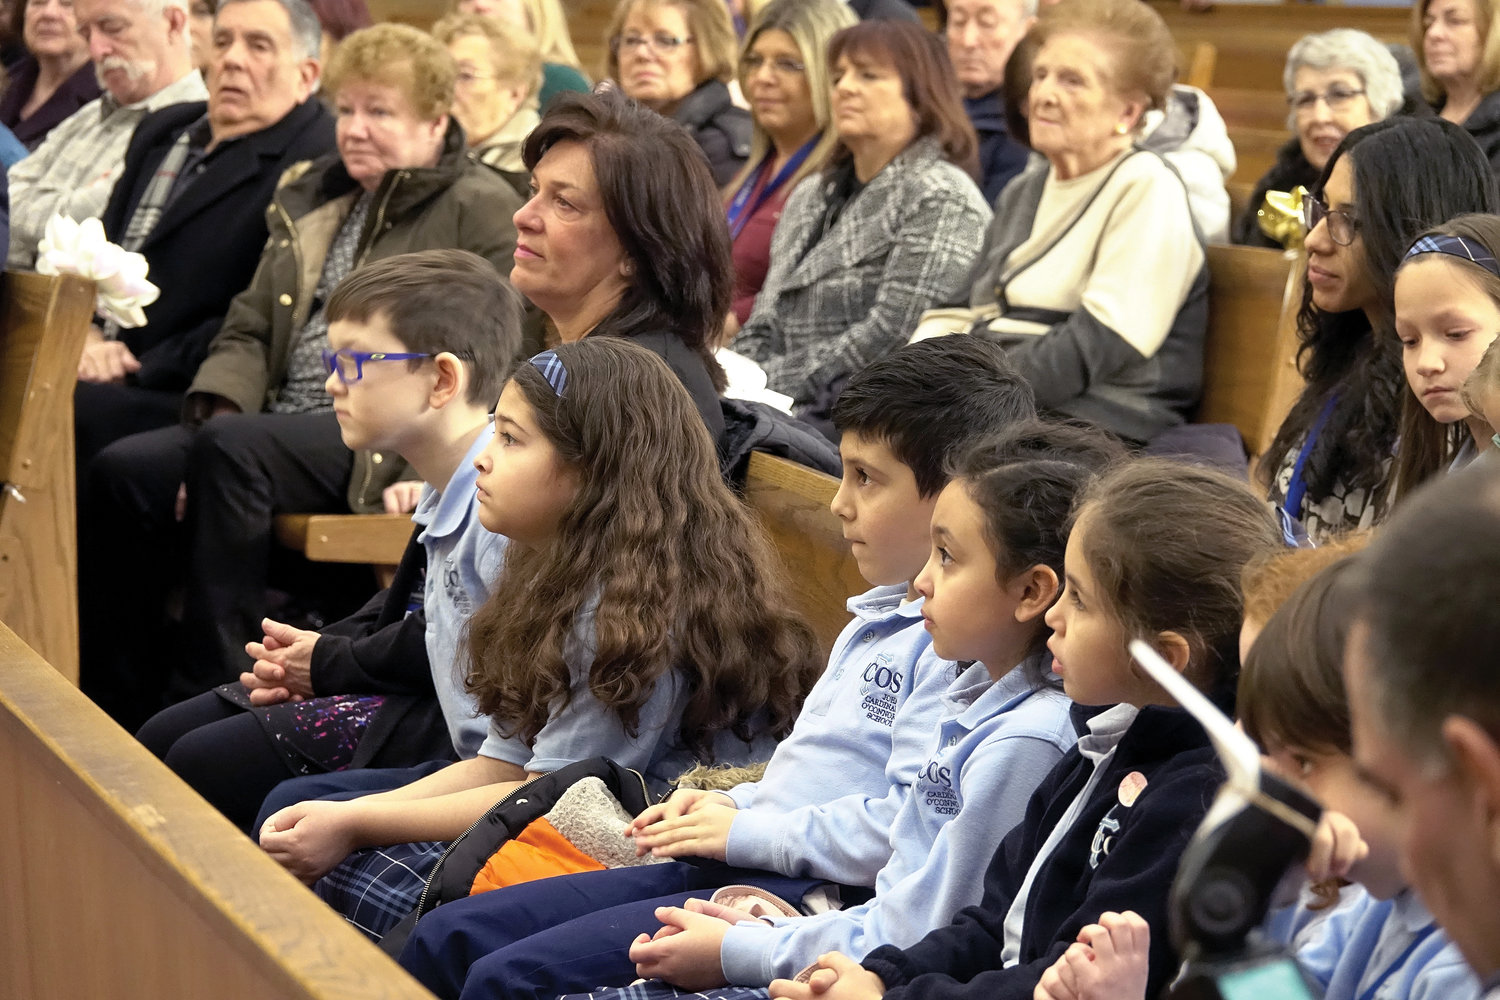 Students, other members of the school and guests attend Mass Cardinal Dolan offered at Immaculate Conception Church before he toured the school and attended a reception there.